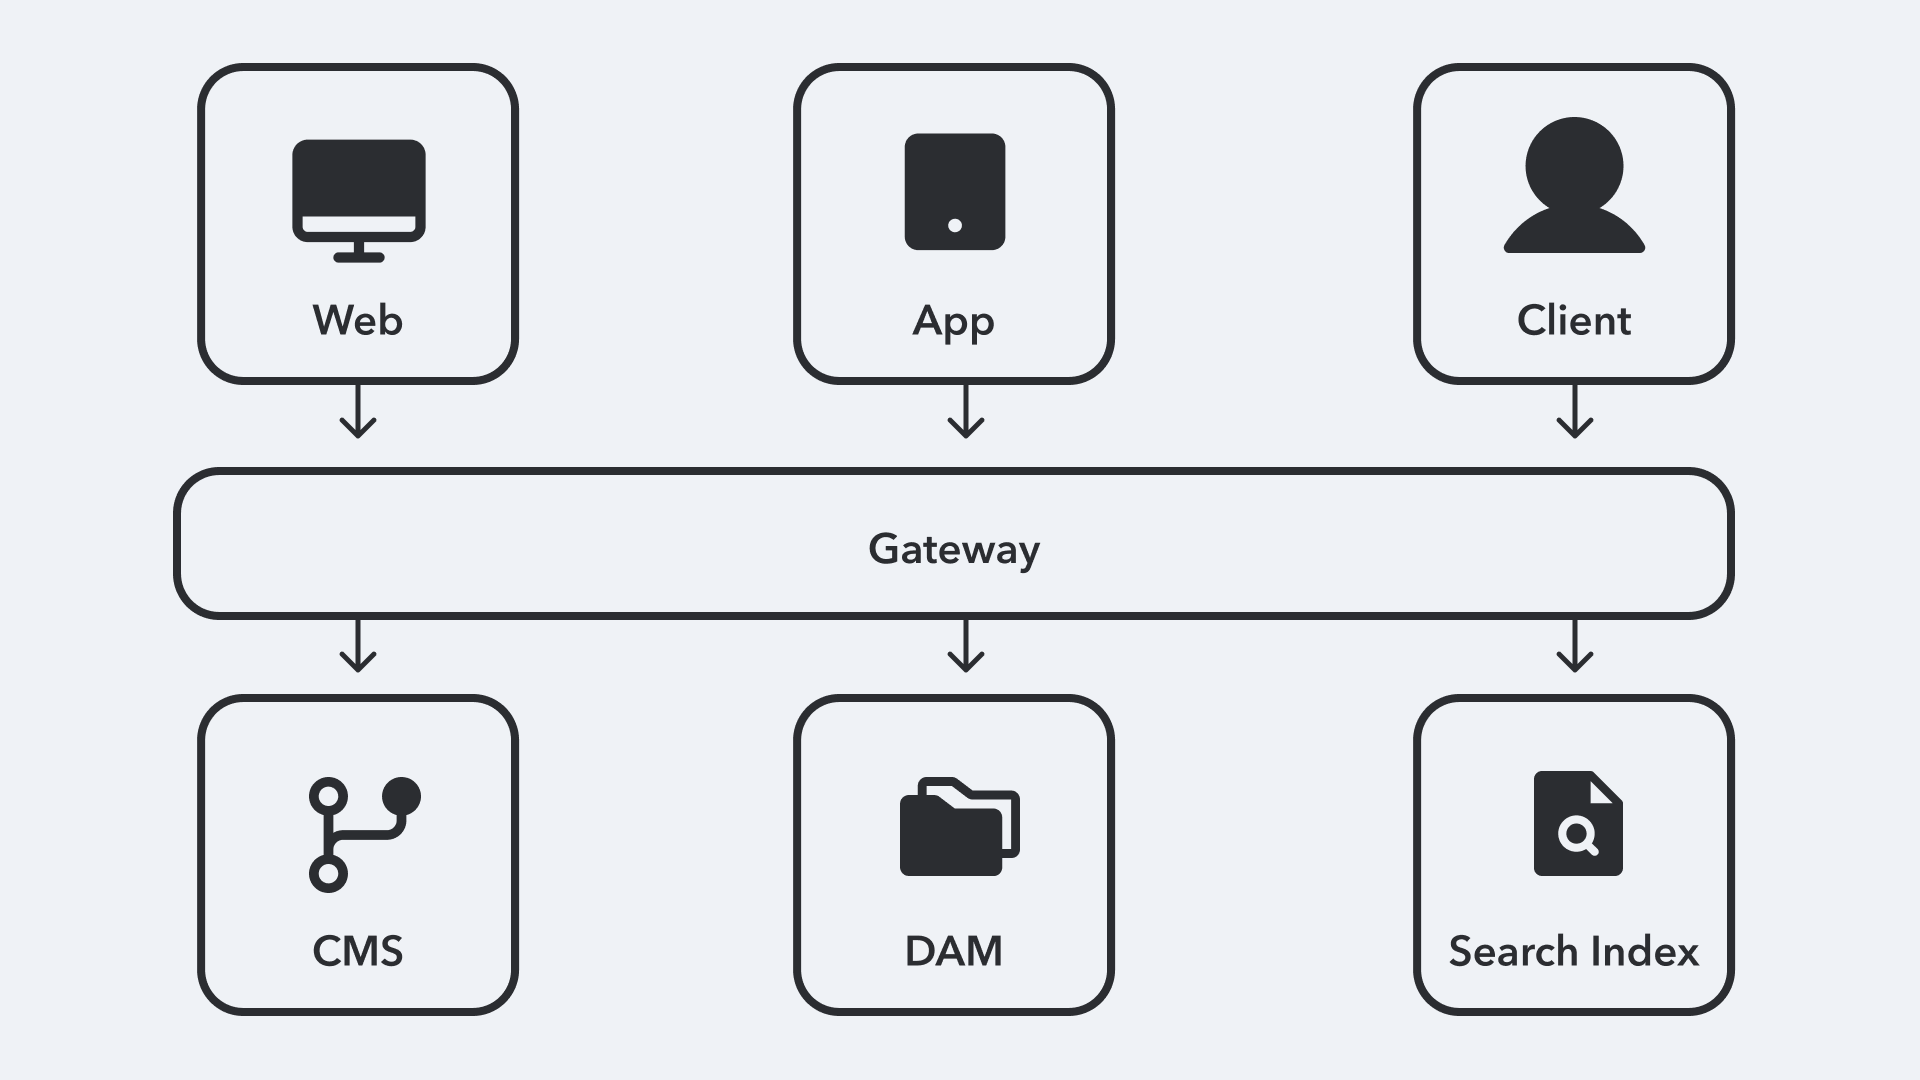 The API gateway is an attempt to take the best of both microservices and monolithic architectures. 